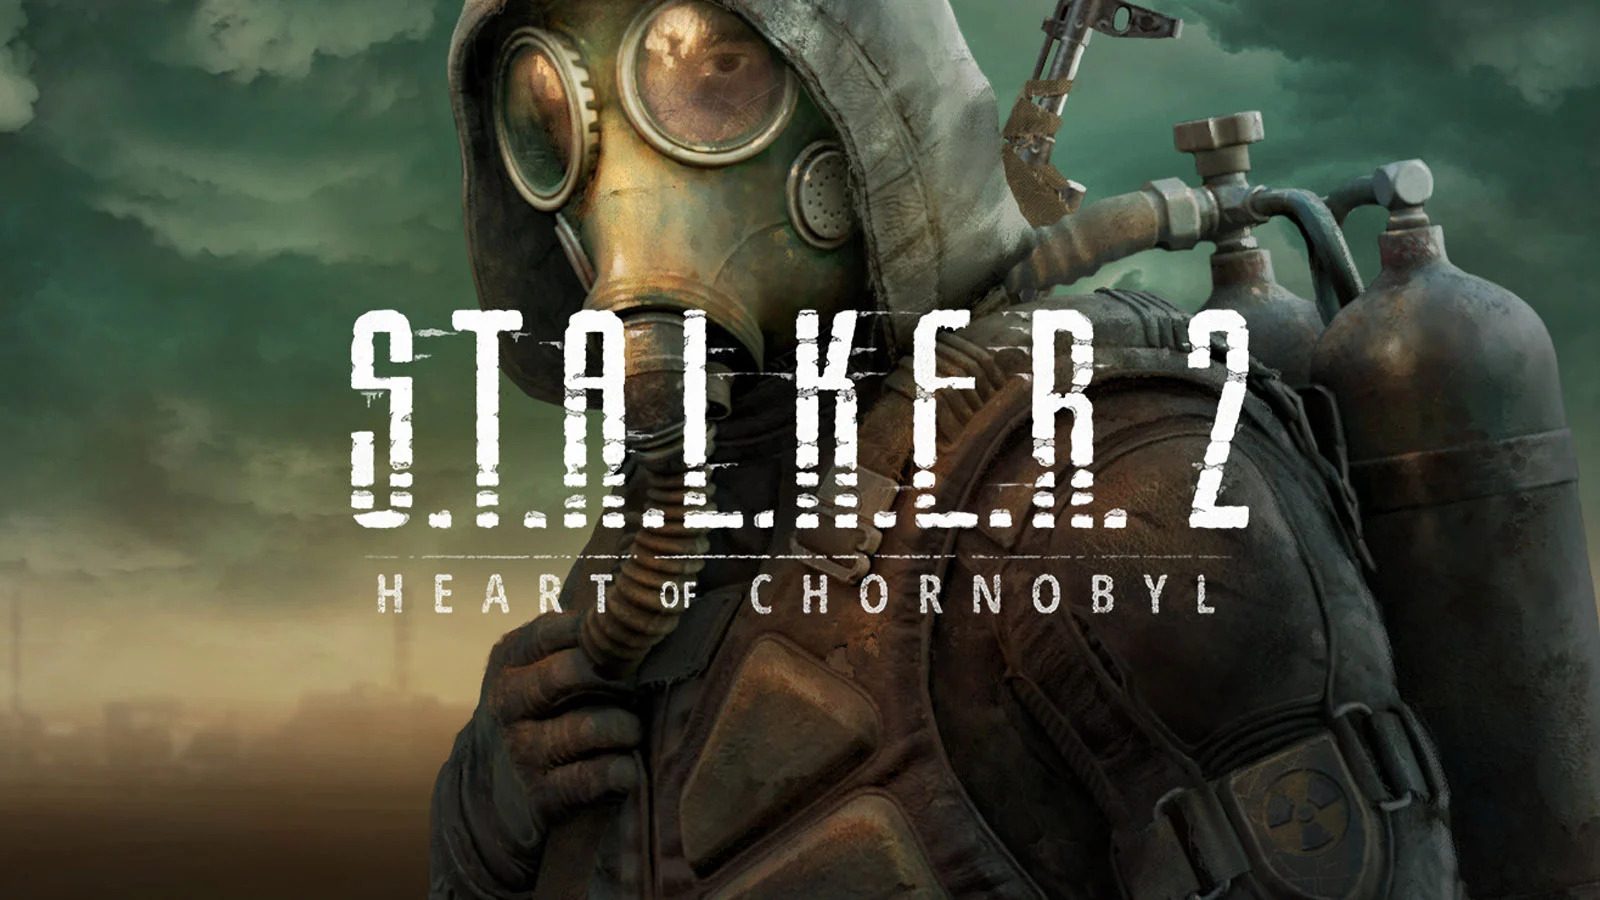 Xbox: 'Stalker 2' Has Been Delayed By Nearly A Year